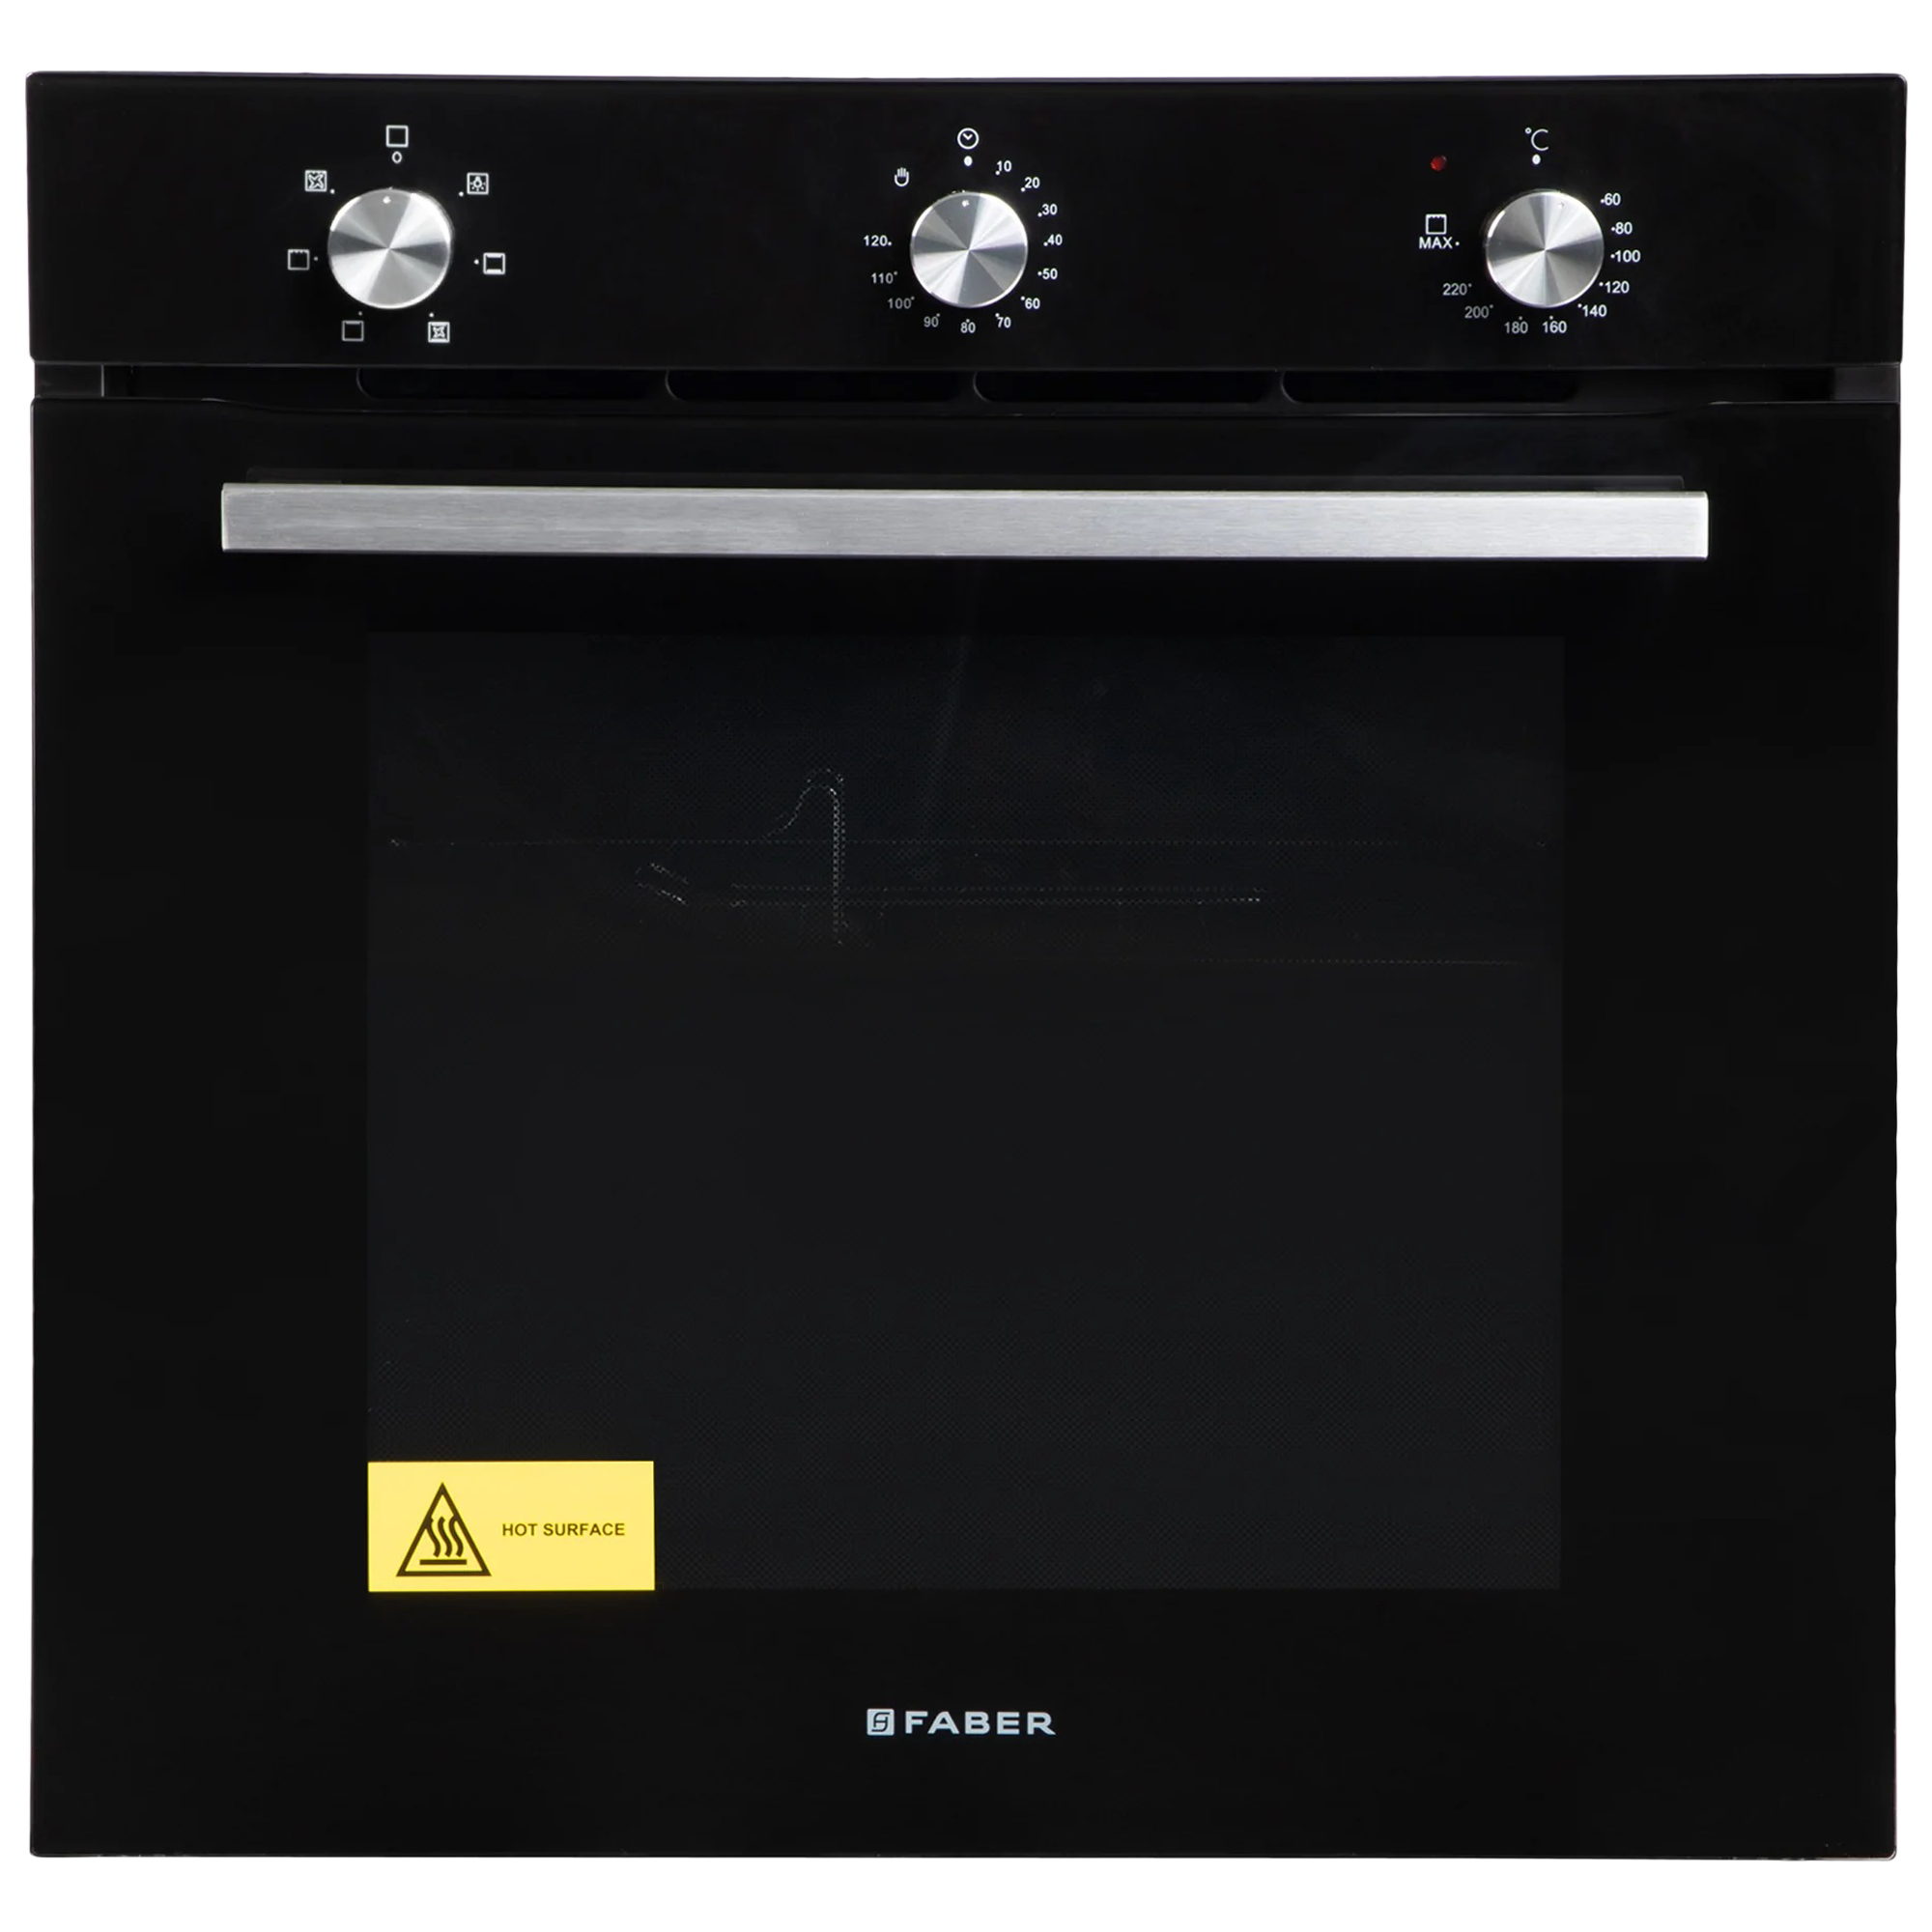 Faber FBIO 80 Litres Built-in Microwave Oven (6 Cooking Function, 116.0680.241, Black)_1